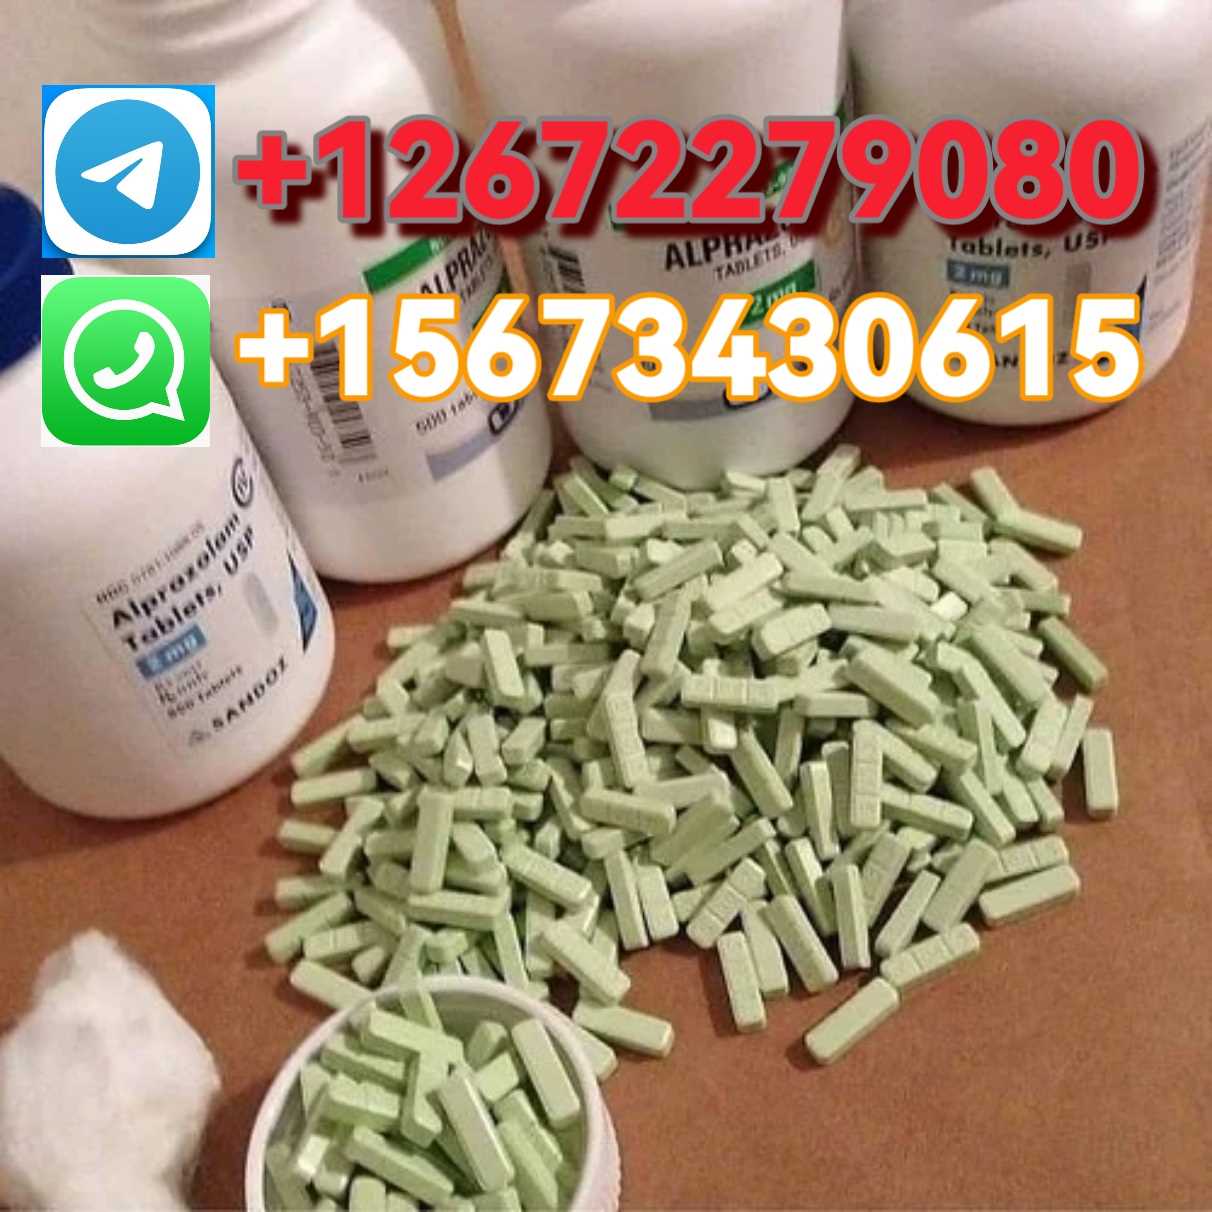 +12672279080 TO ORDE THC OIL, XANAX AND SHROOMS IN AMSTERDAM AND LITHUANIA